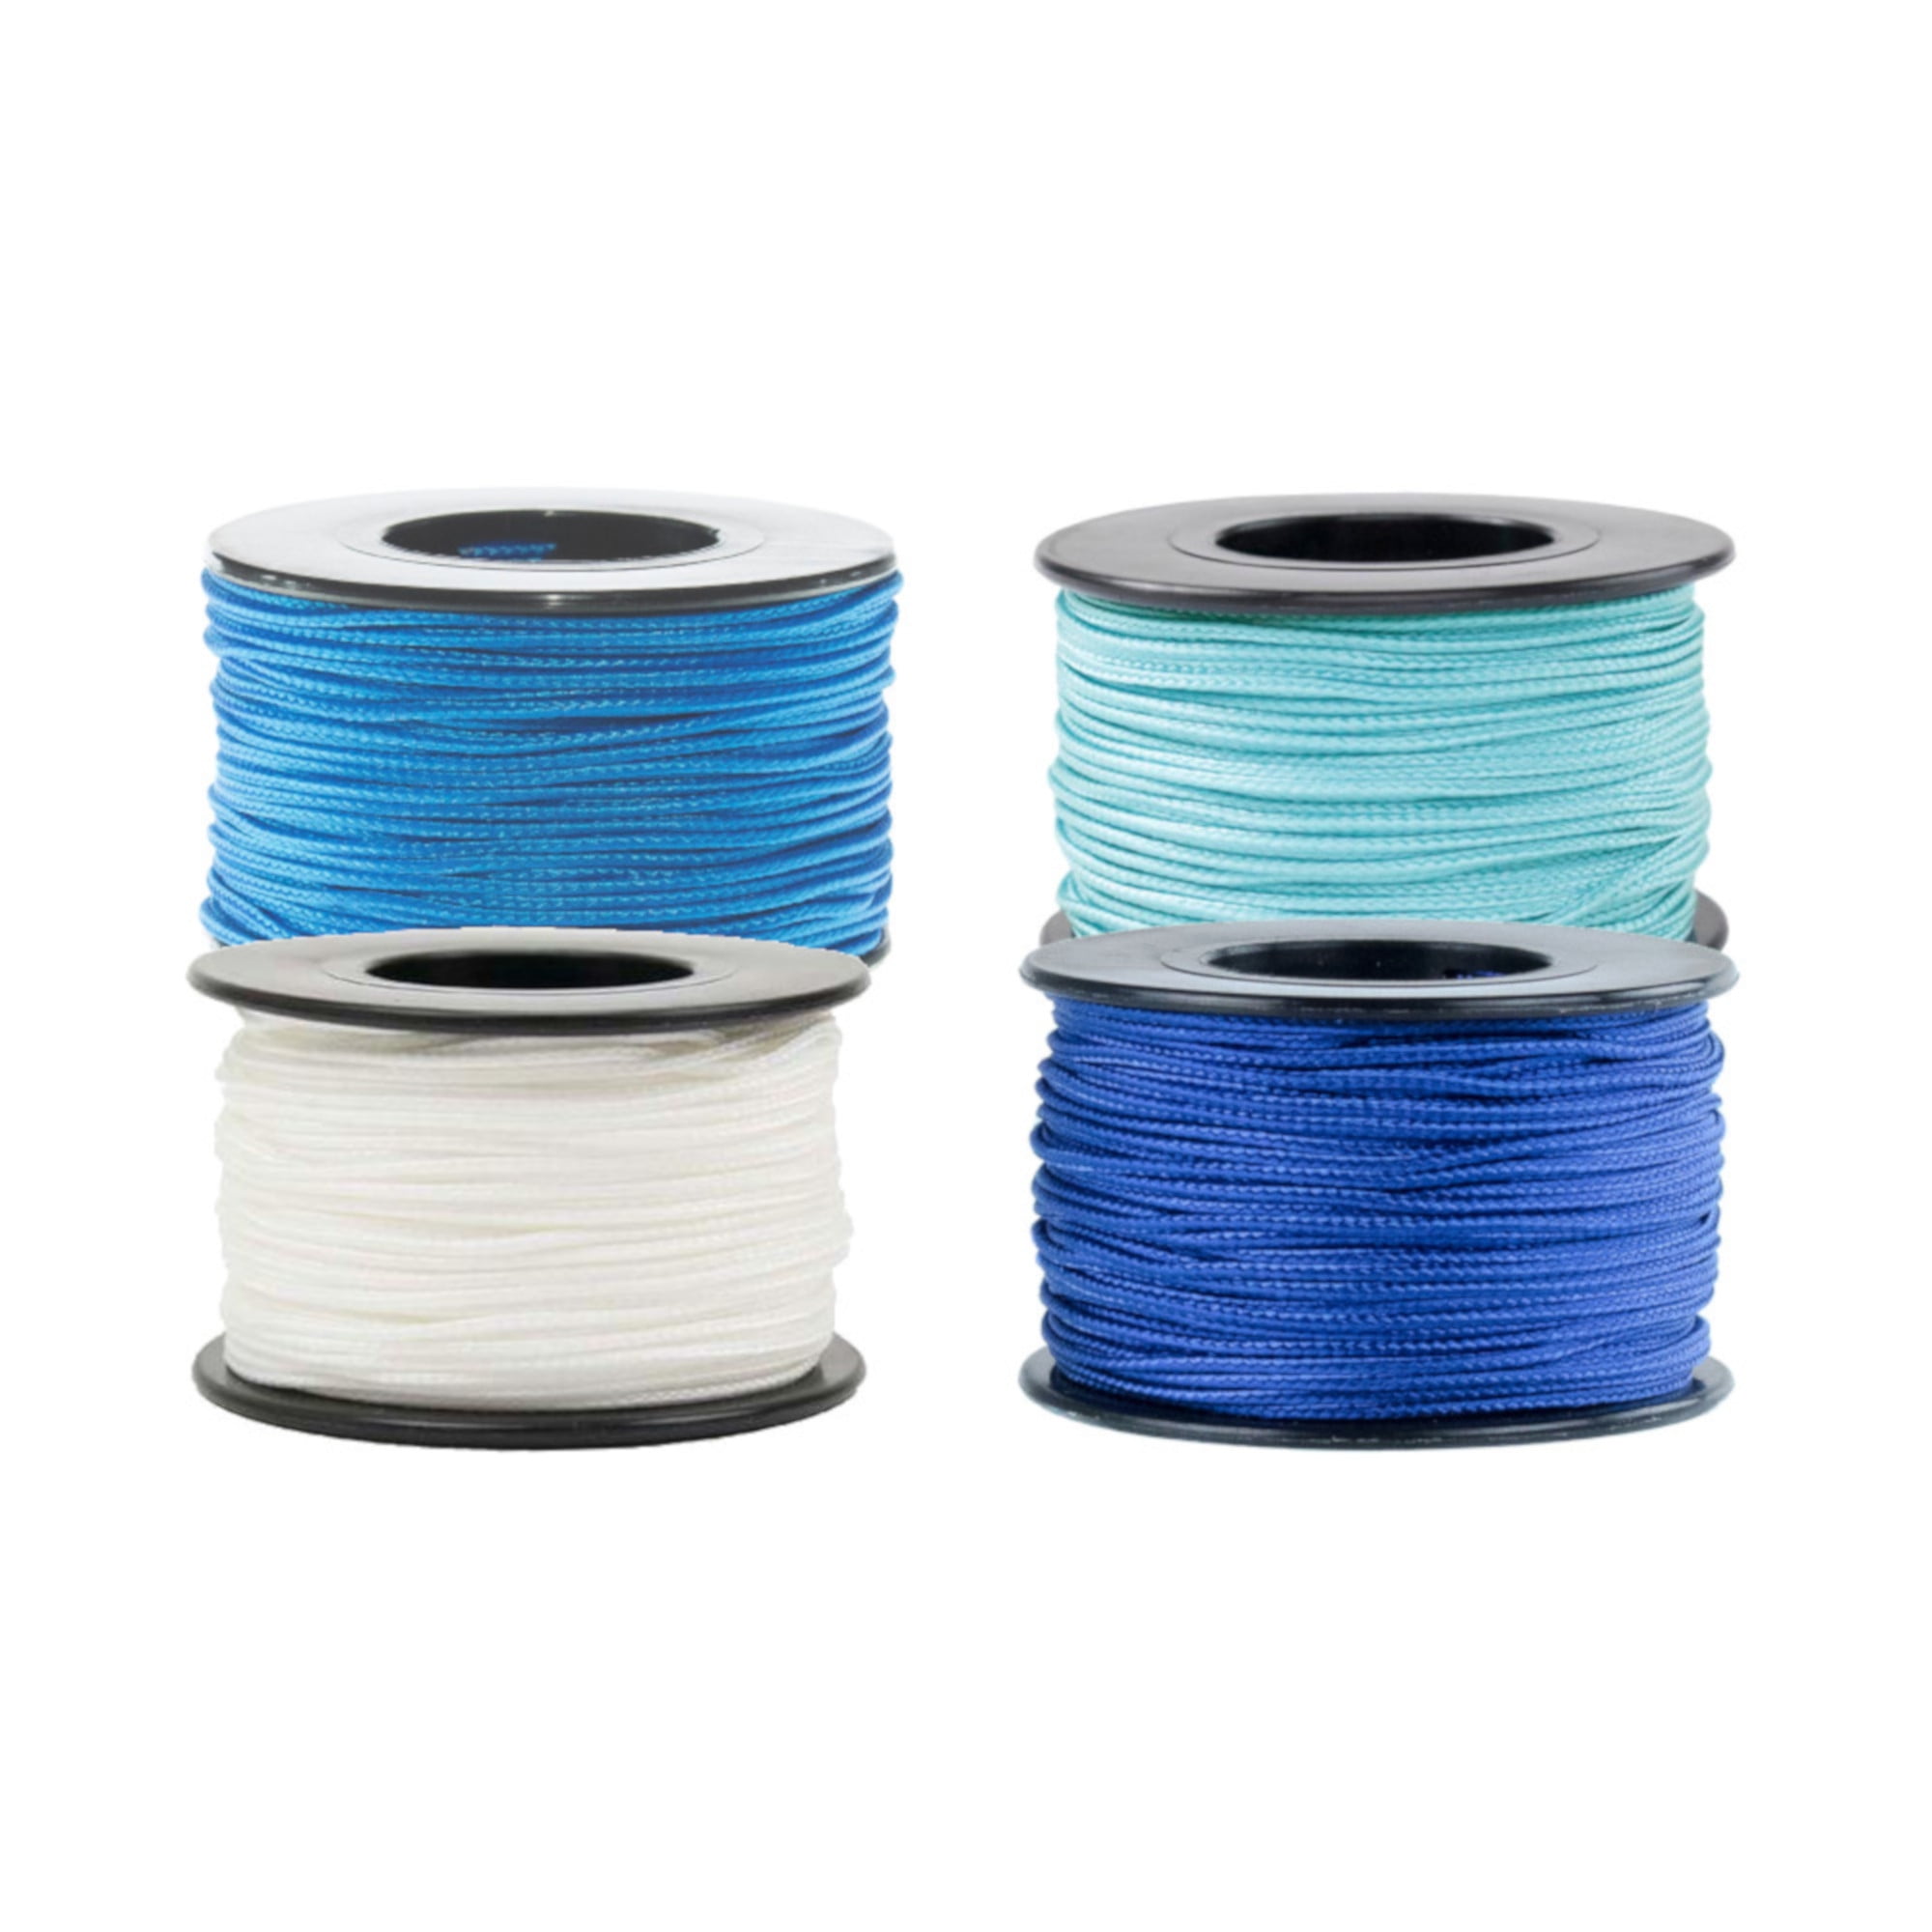 300 and 125 Feet Spool of Braided Cord Available in a Variety of Colors West Coast Paracord Nano and Micro Cord 